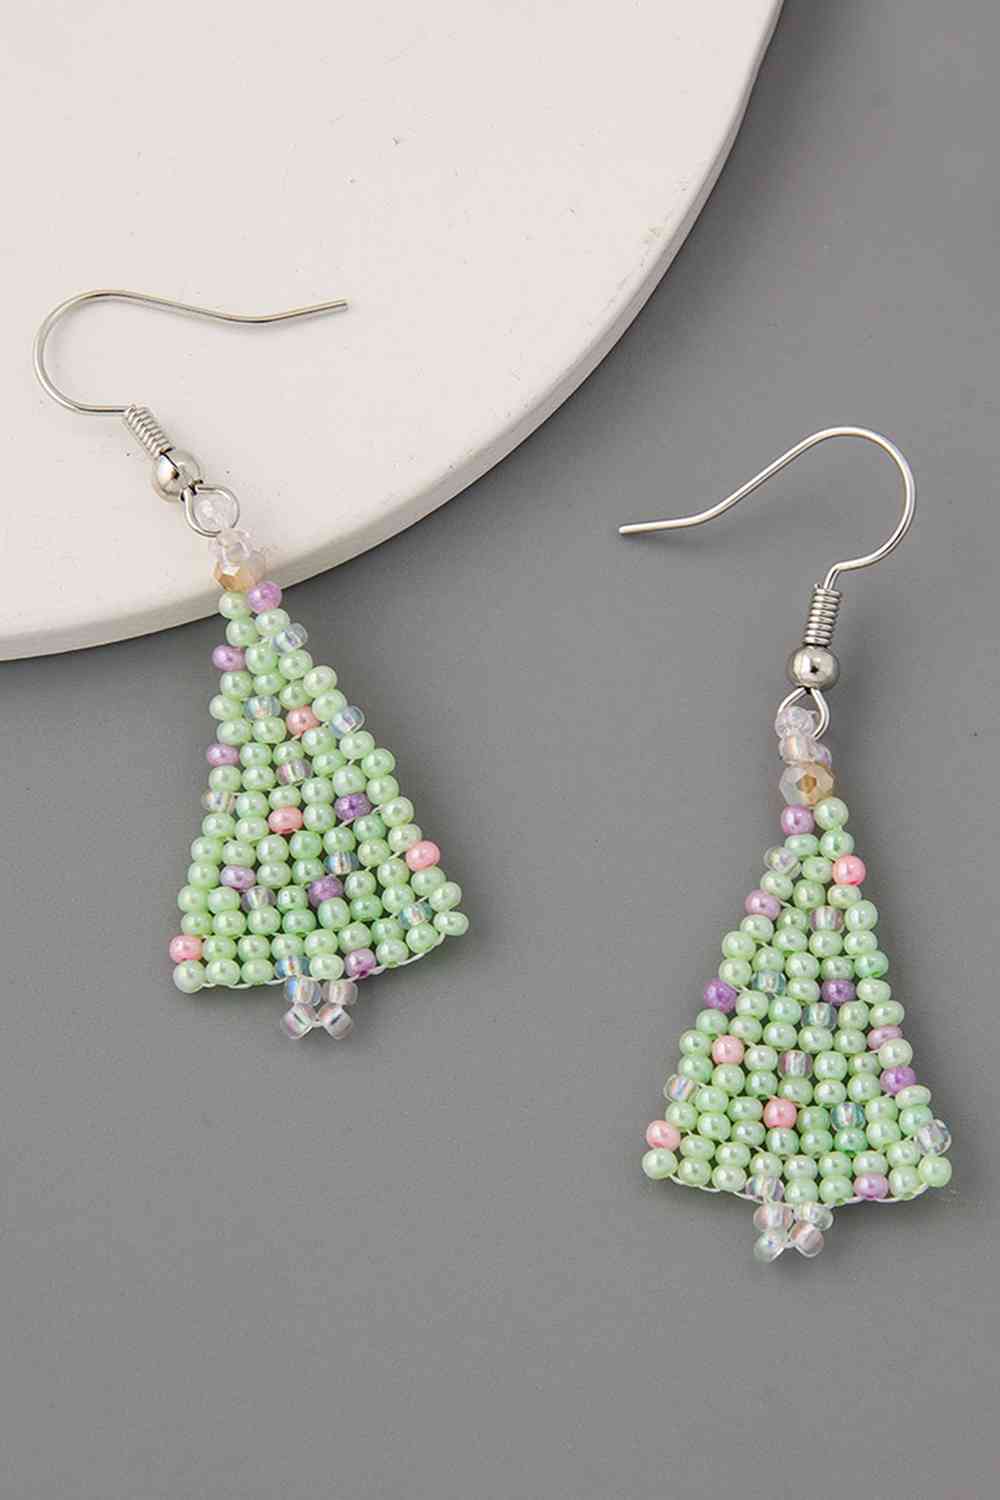 Beaded Christmas Tree Earrings - Kawaii Stop - Beaded accessories, Christmas, Christmas earrings, Christmas fashion, Christmas party, Festive outfit, Gift ideas, Glamorous earrings, Holiday jewelry, Holiday season, Party-ready earrings, Seasonal bling, Ship From Overseas, Sparkling earrings, Statement jewelry, Unique Christmas gifts, Y.Q@Jew